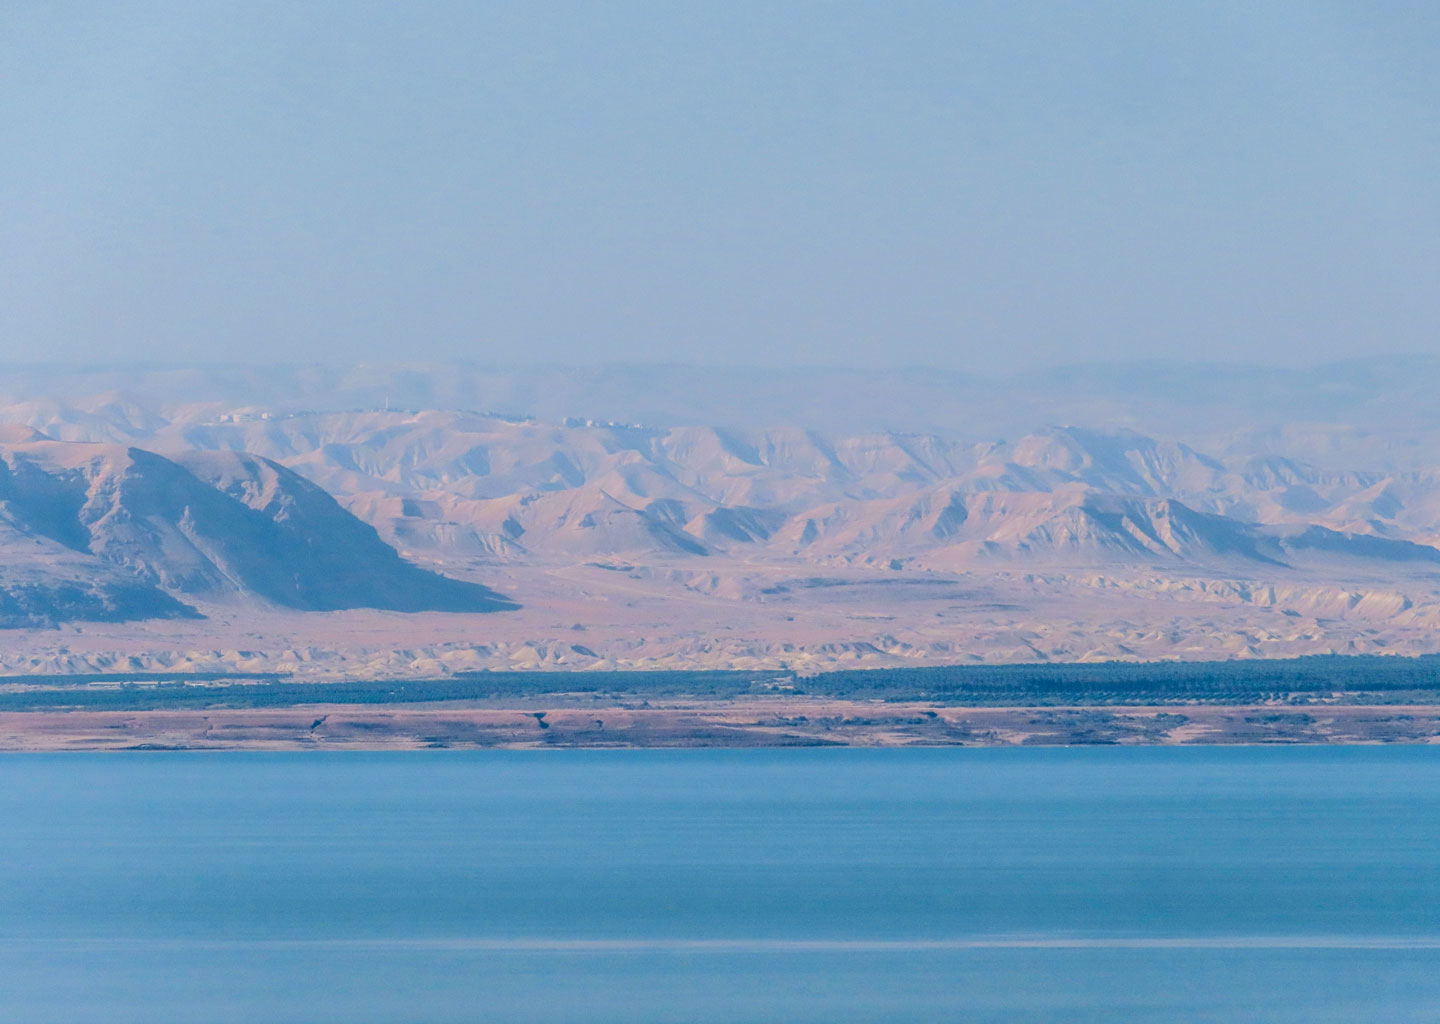 The Dead Sea and the Judean Mountains seen from Jordan.